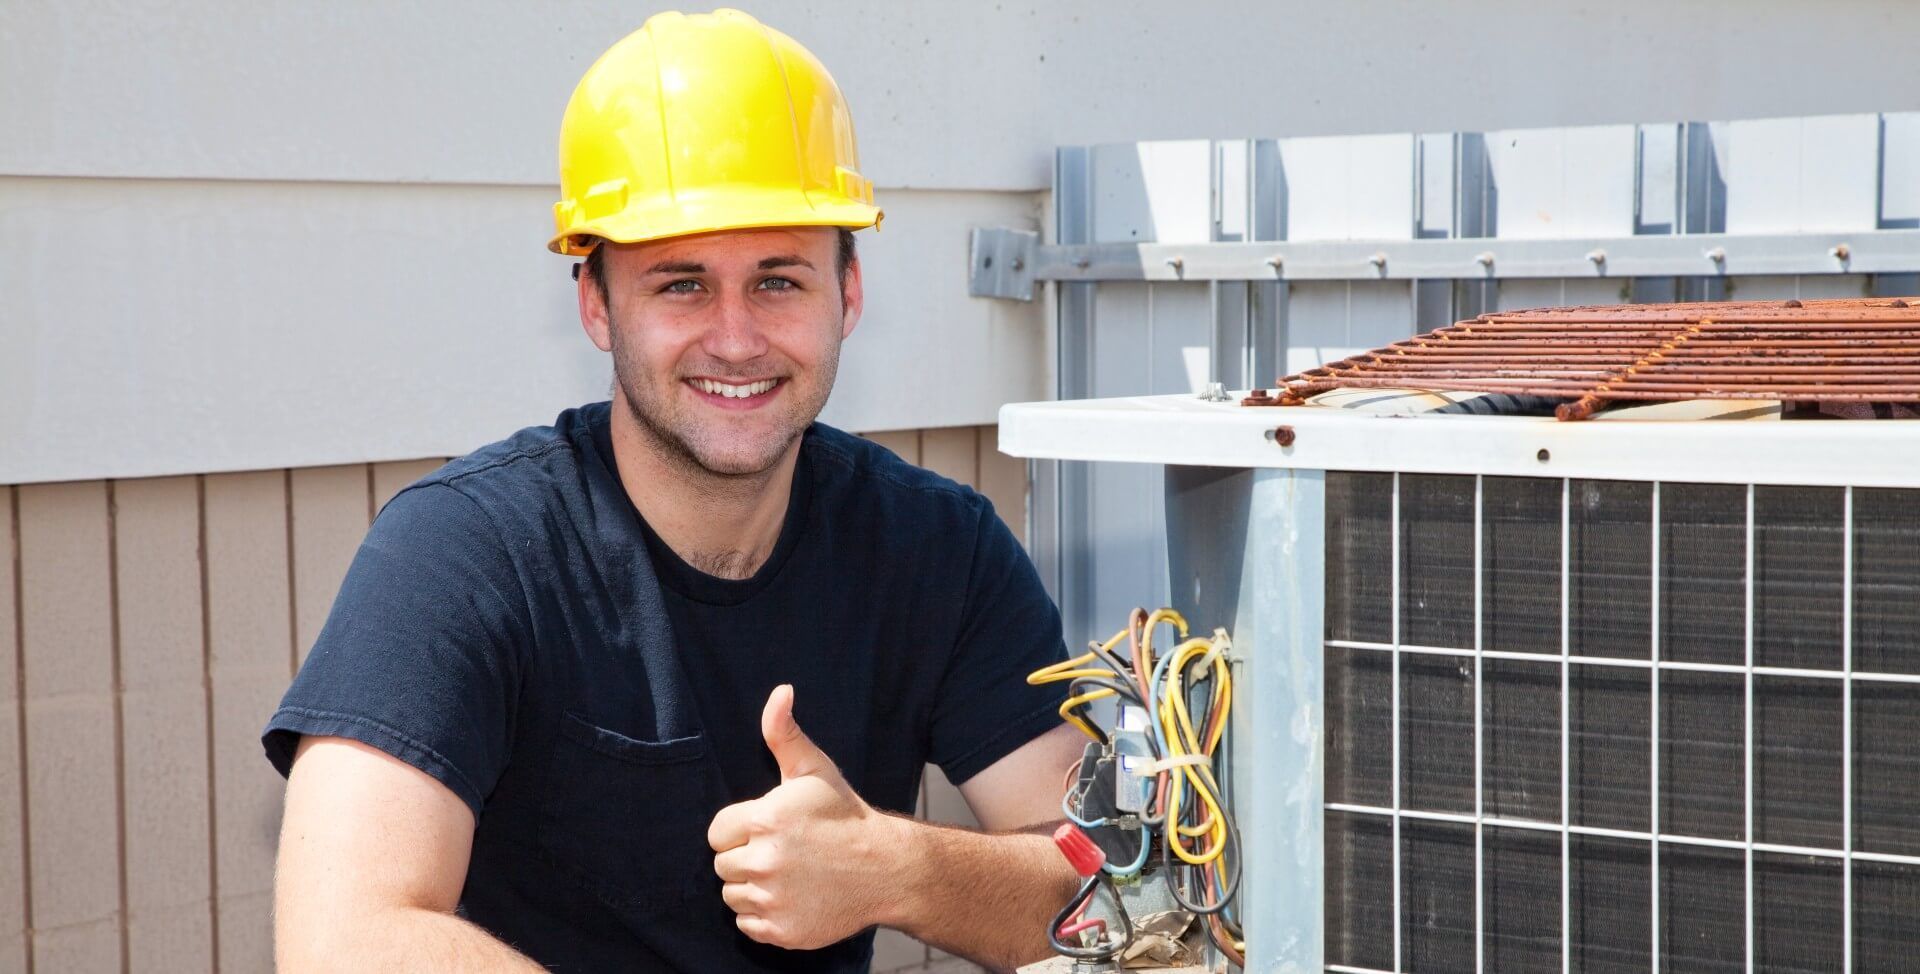 Air duct cleaner giving a thumbs up while conducting an air duct cleaning